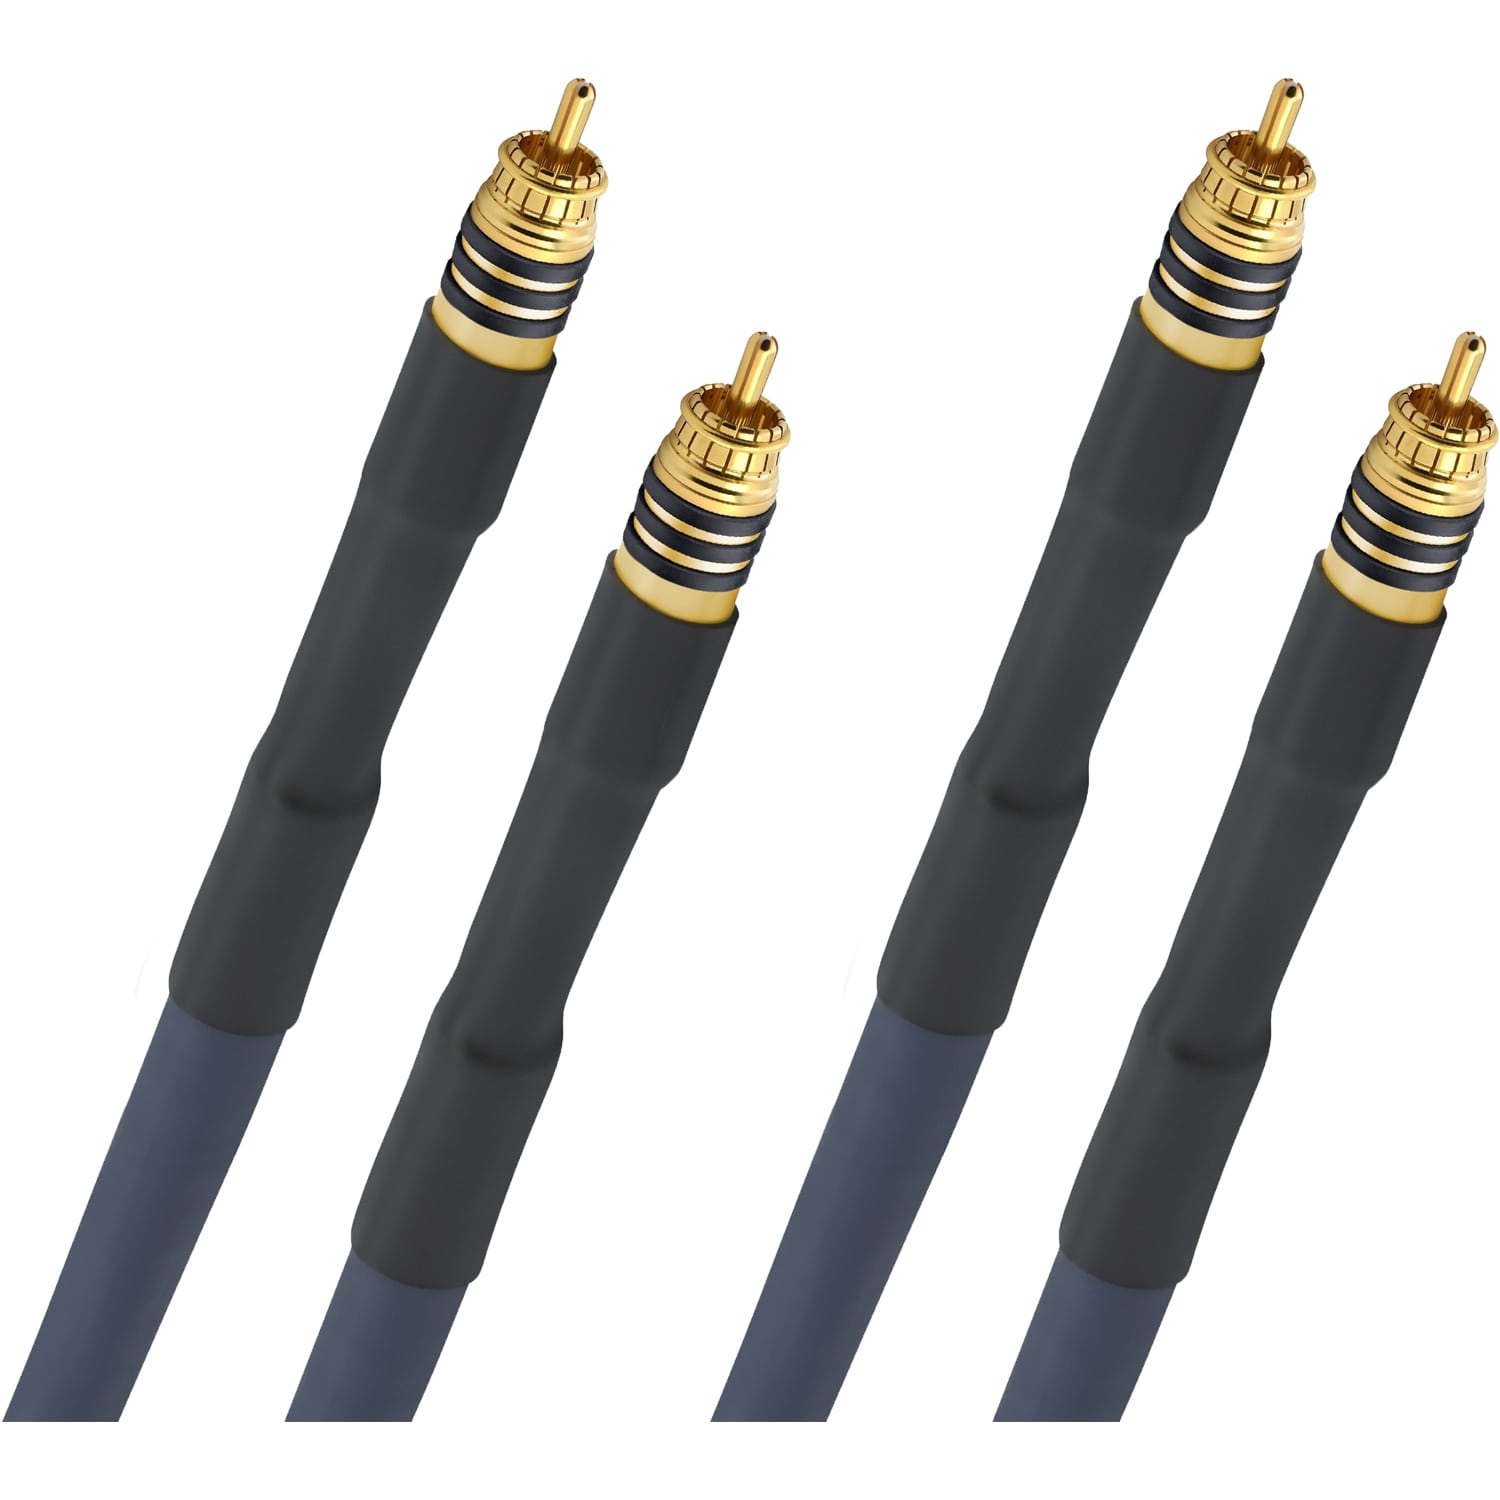 Кабели межблочные аудио Oehlbach STATE OF THE ART XXL Cable RCA, 2x1,25m, gold, D1C13113 кабели межблочные аудио oehlbach state of the art xxl cable xlr 2x2 0m gold d1c13136